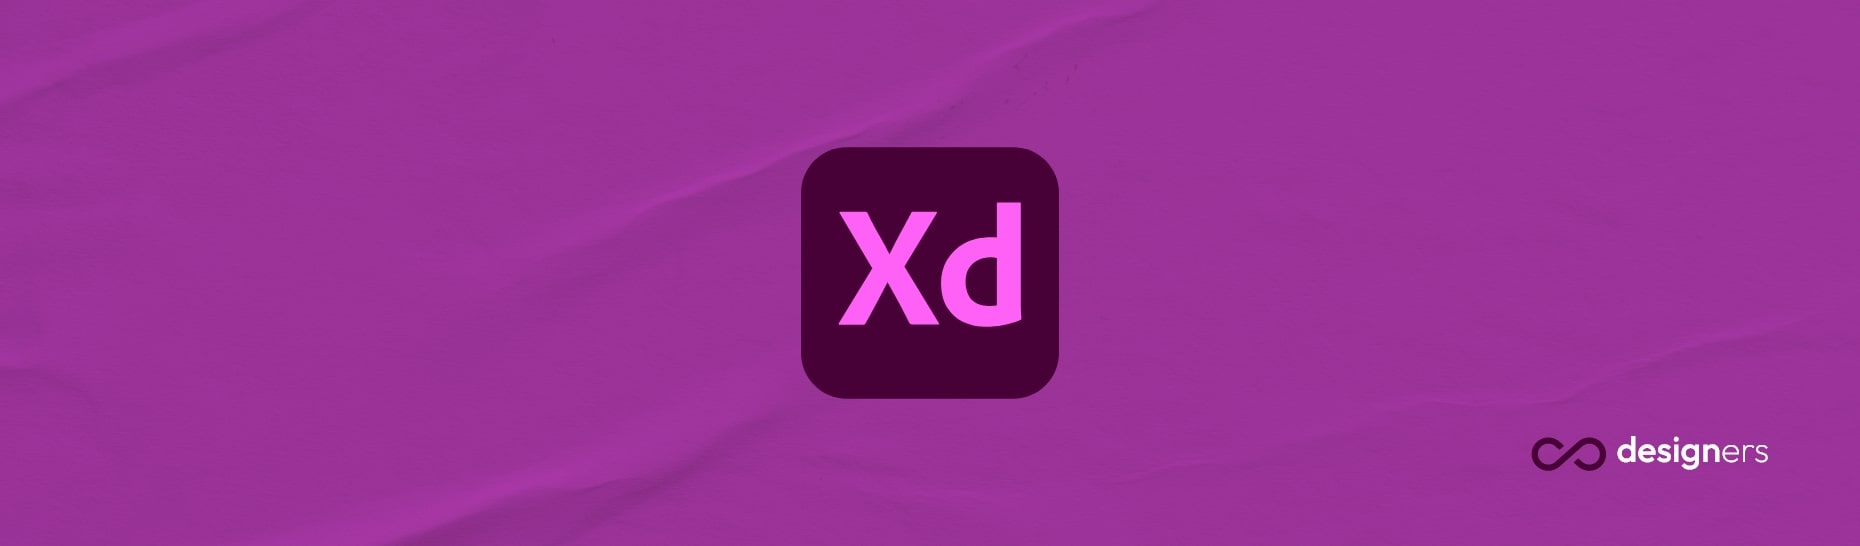 Is Adobe XD enough for UX design?